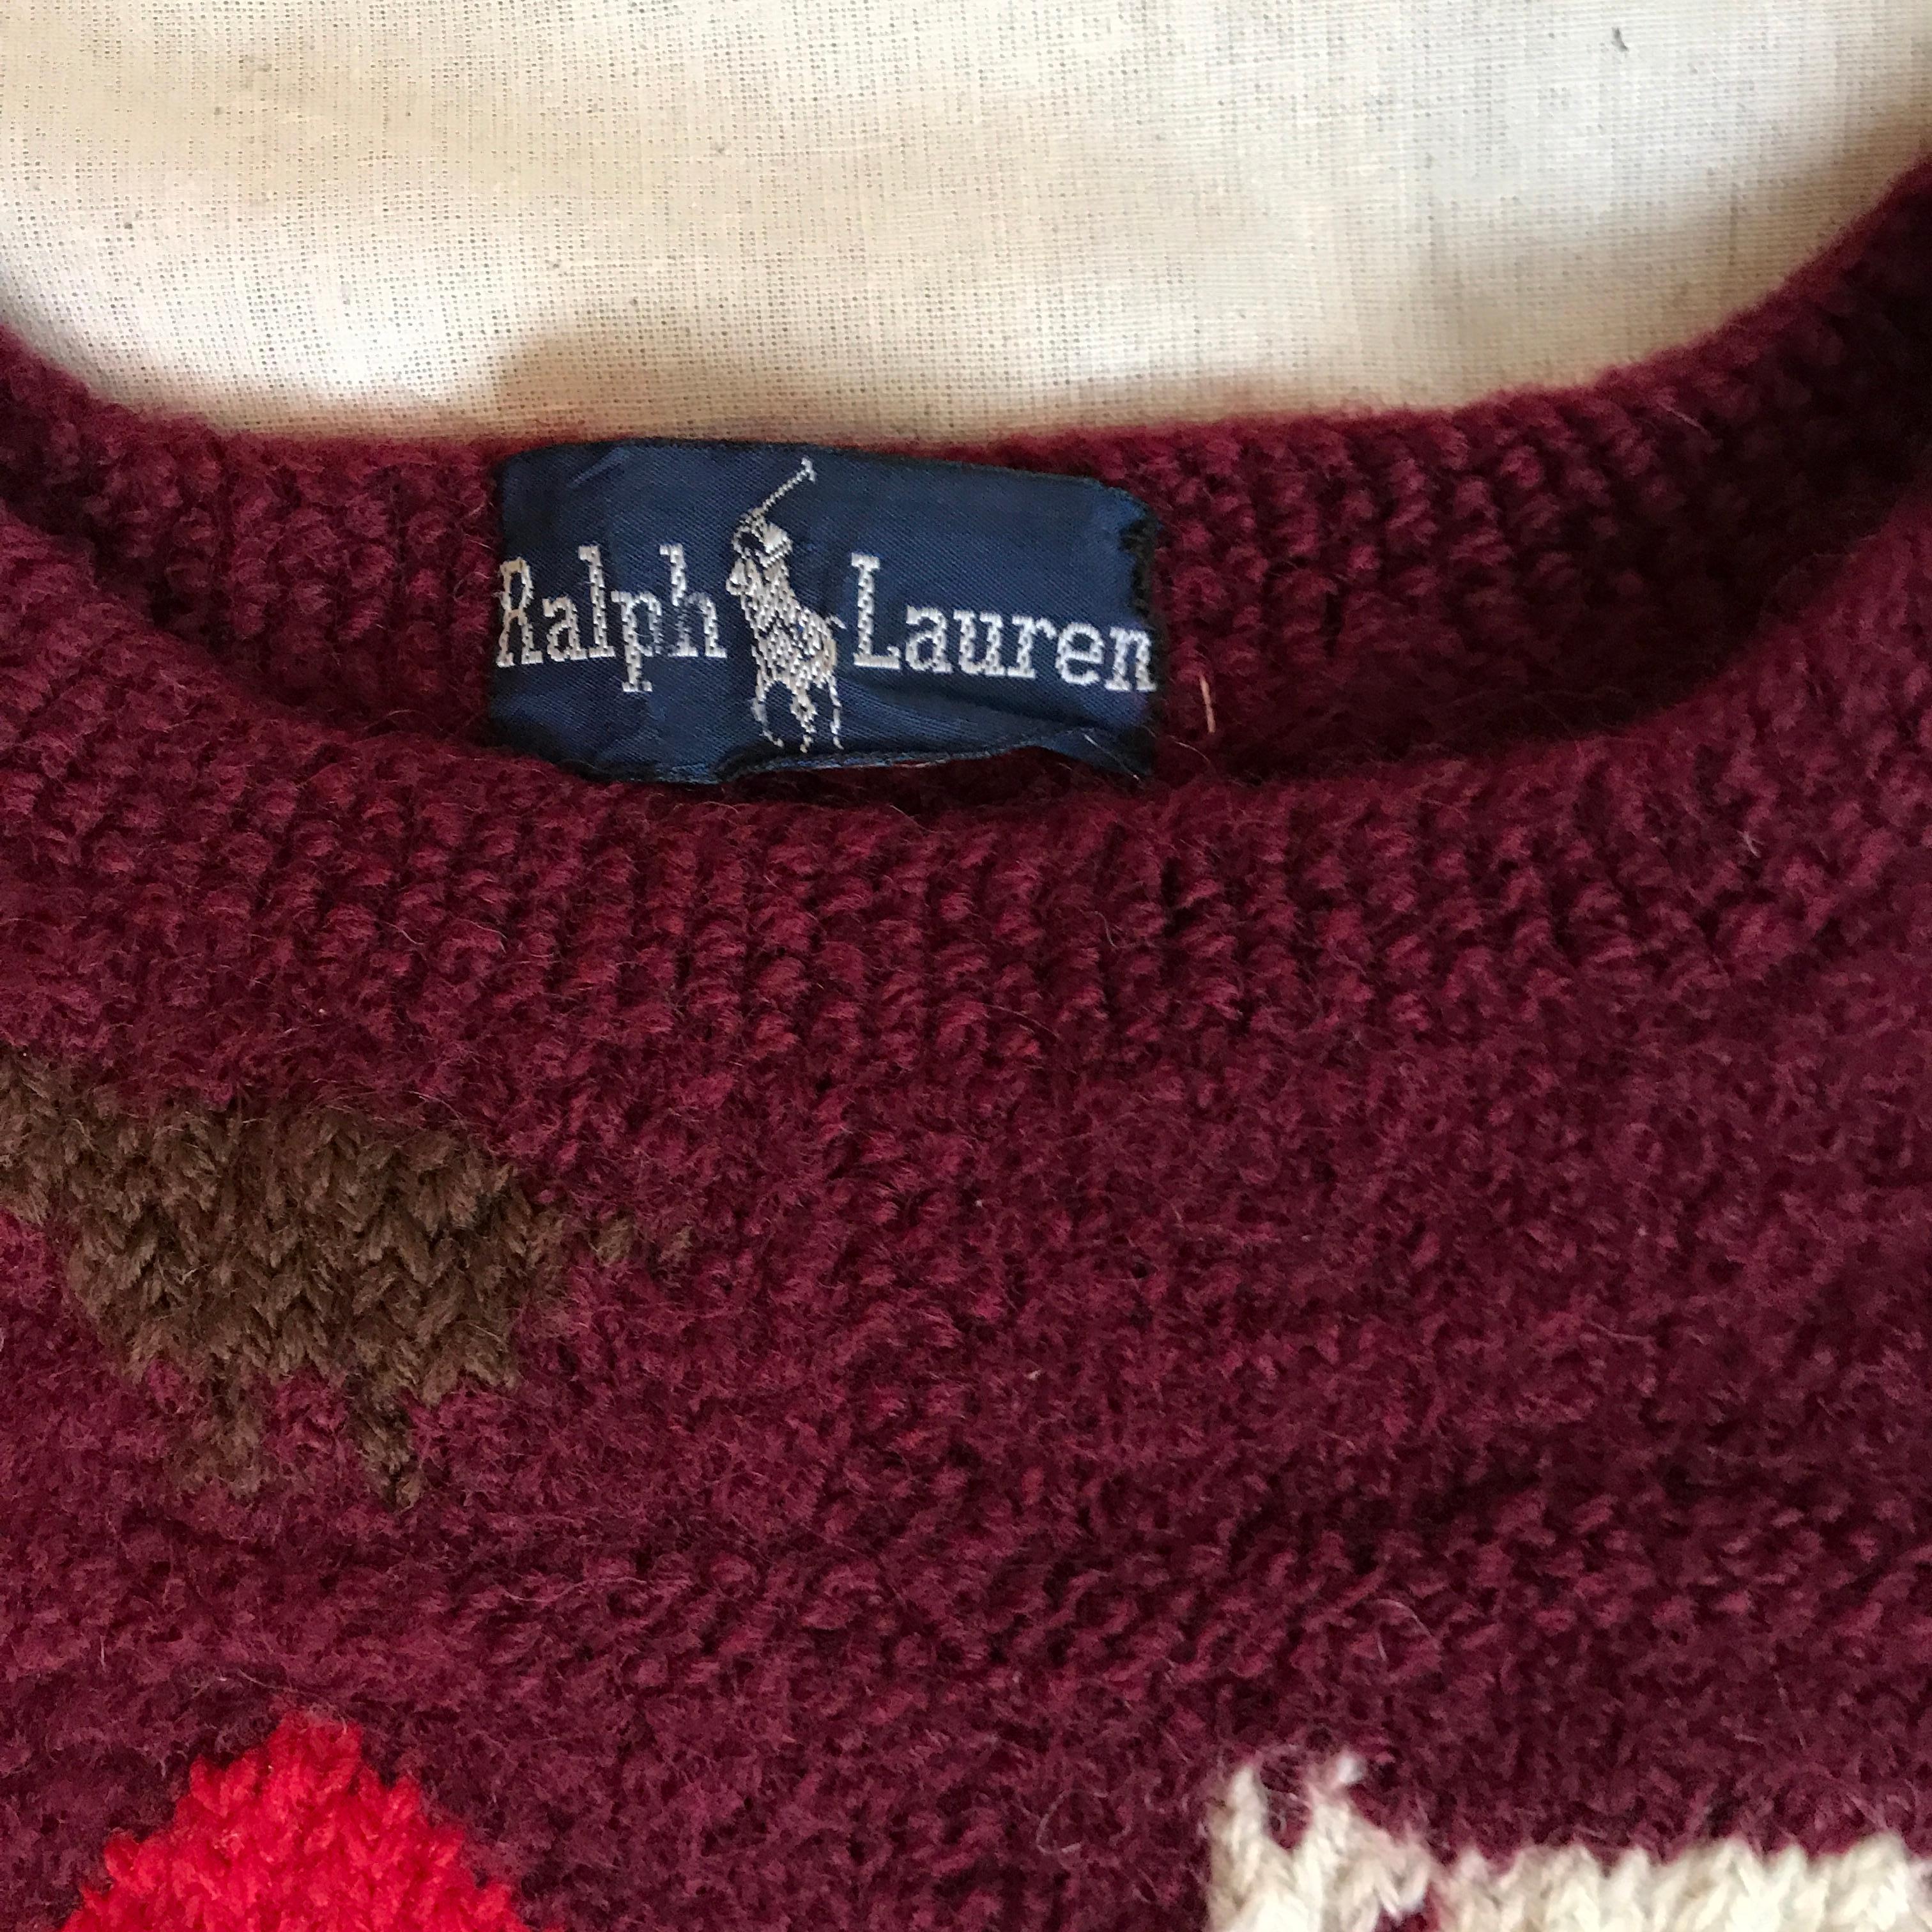 Highly collectable vintage Ralph Lauren sweater from 1982. Hand Knitted shetland wool dated 1982 (RL 82) This sweater is a classic bit of Americana. 